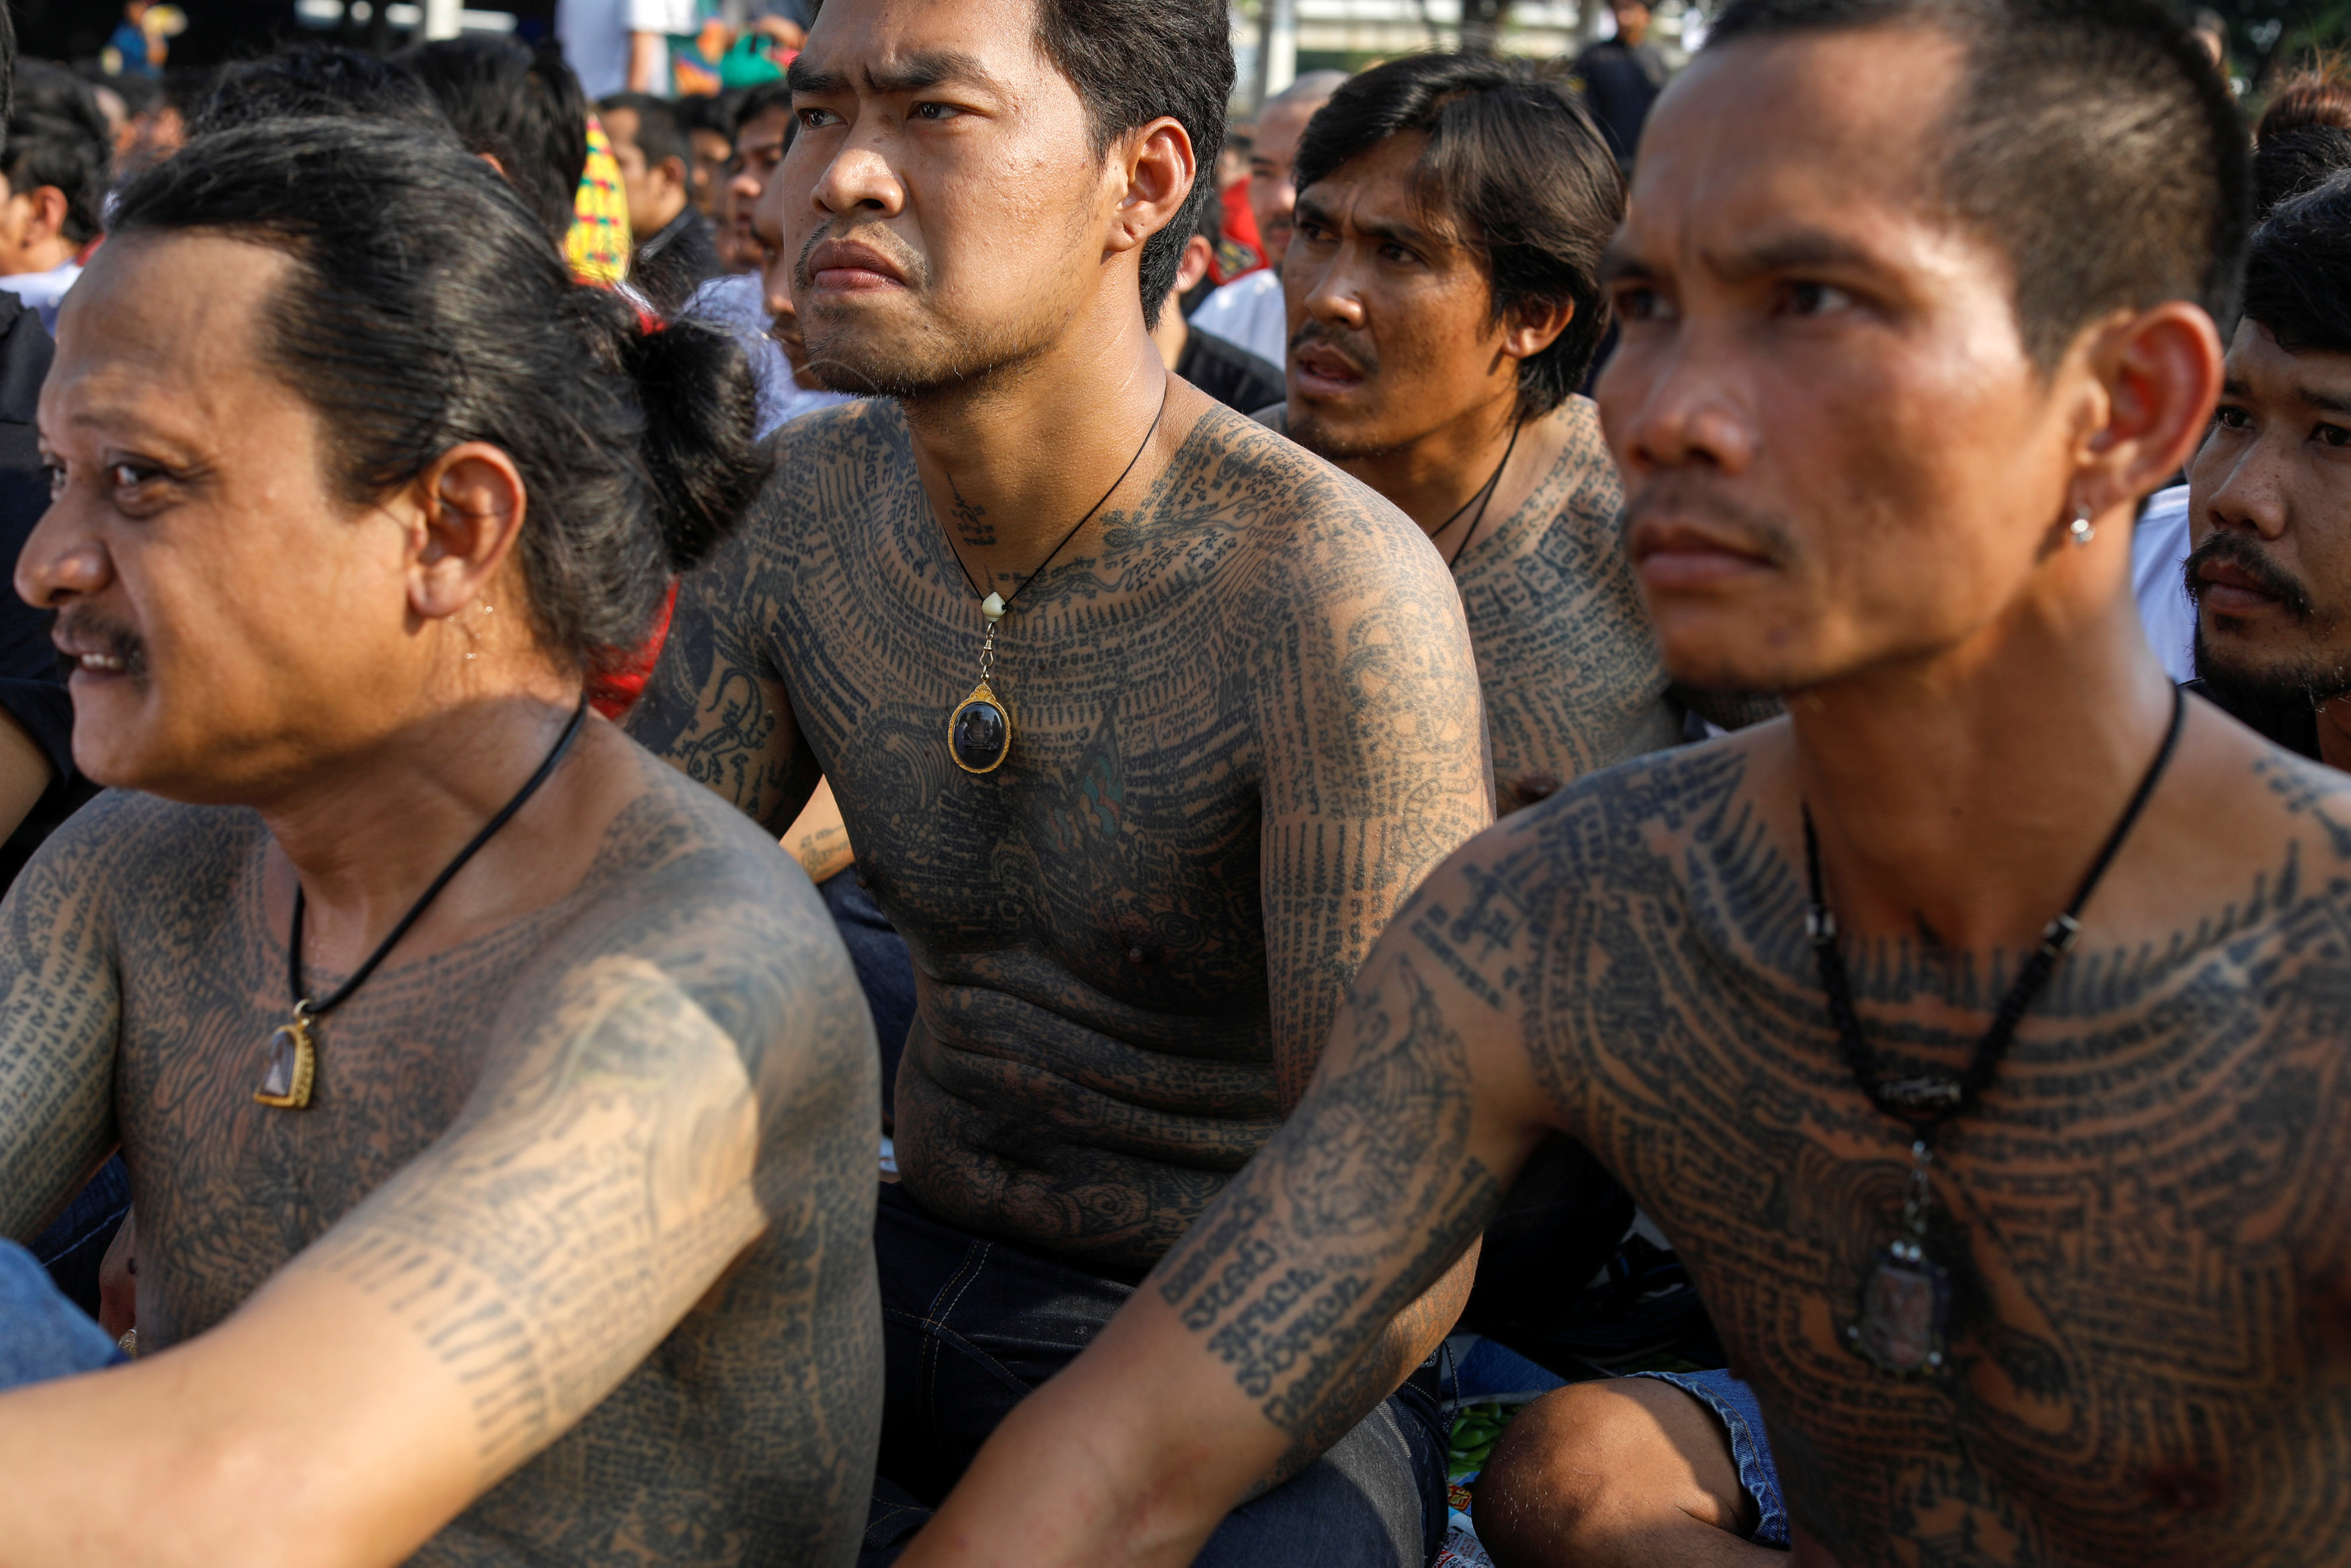 Devotees attend the religious tattoo festival at Wat Bang Phra, where they come to recharge the power of their sacred tattoos, in Nakhon Pathom province, Thailand, March 11, 2017. REUTERS/Jorge Silva